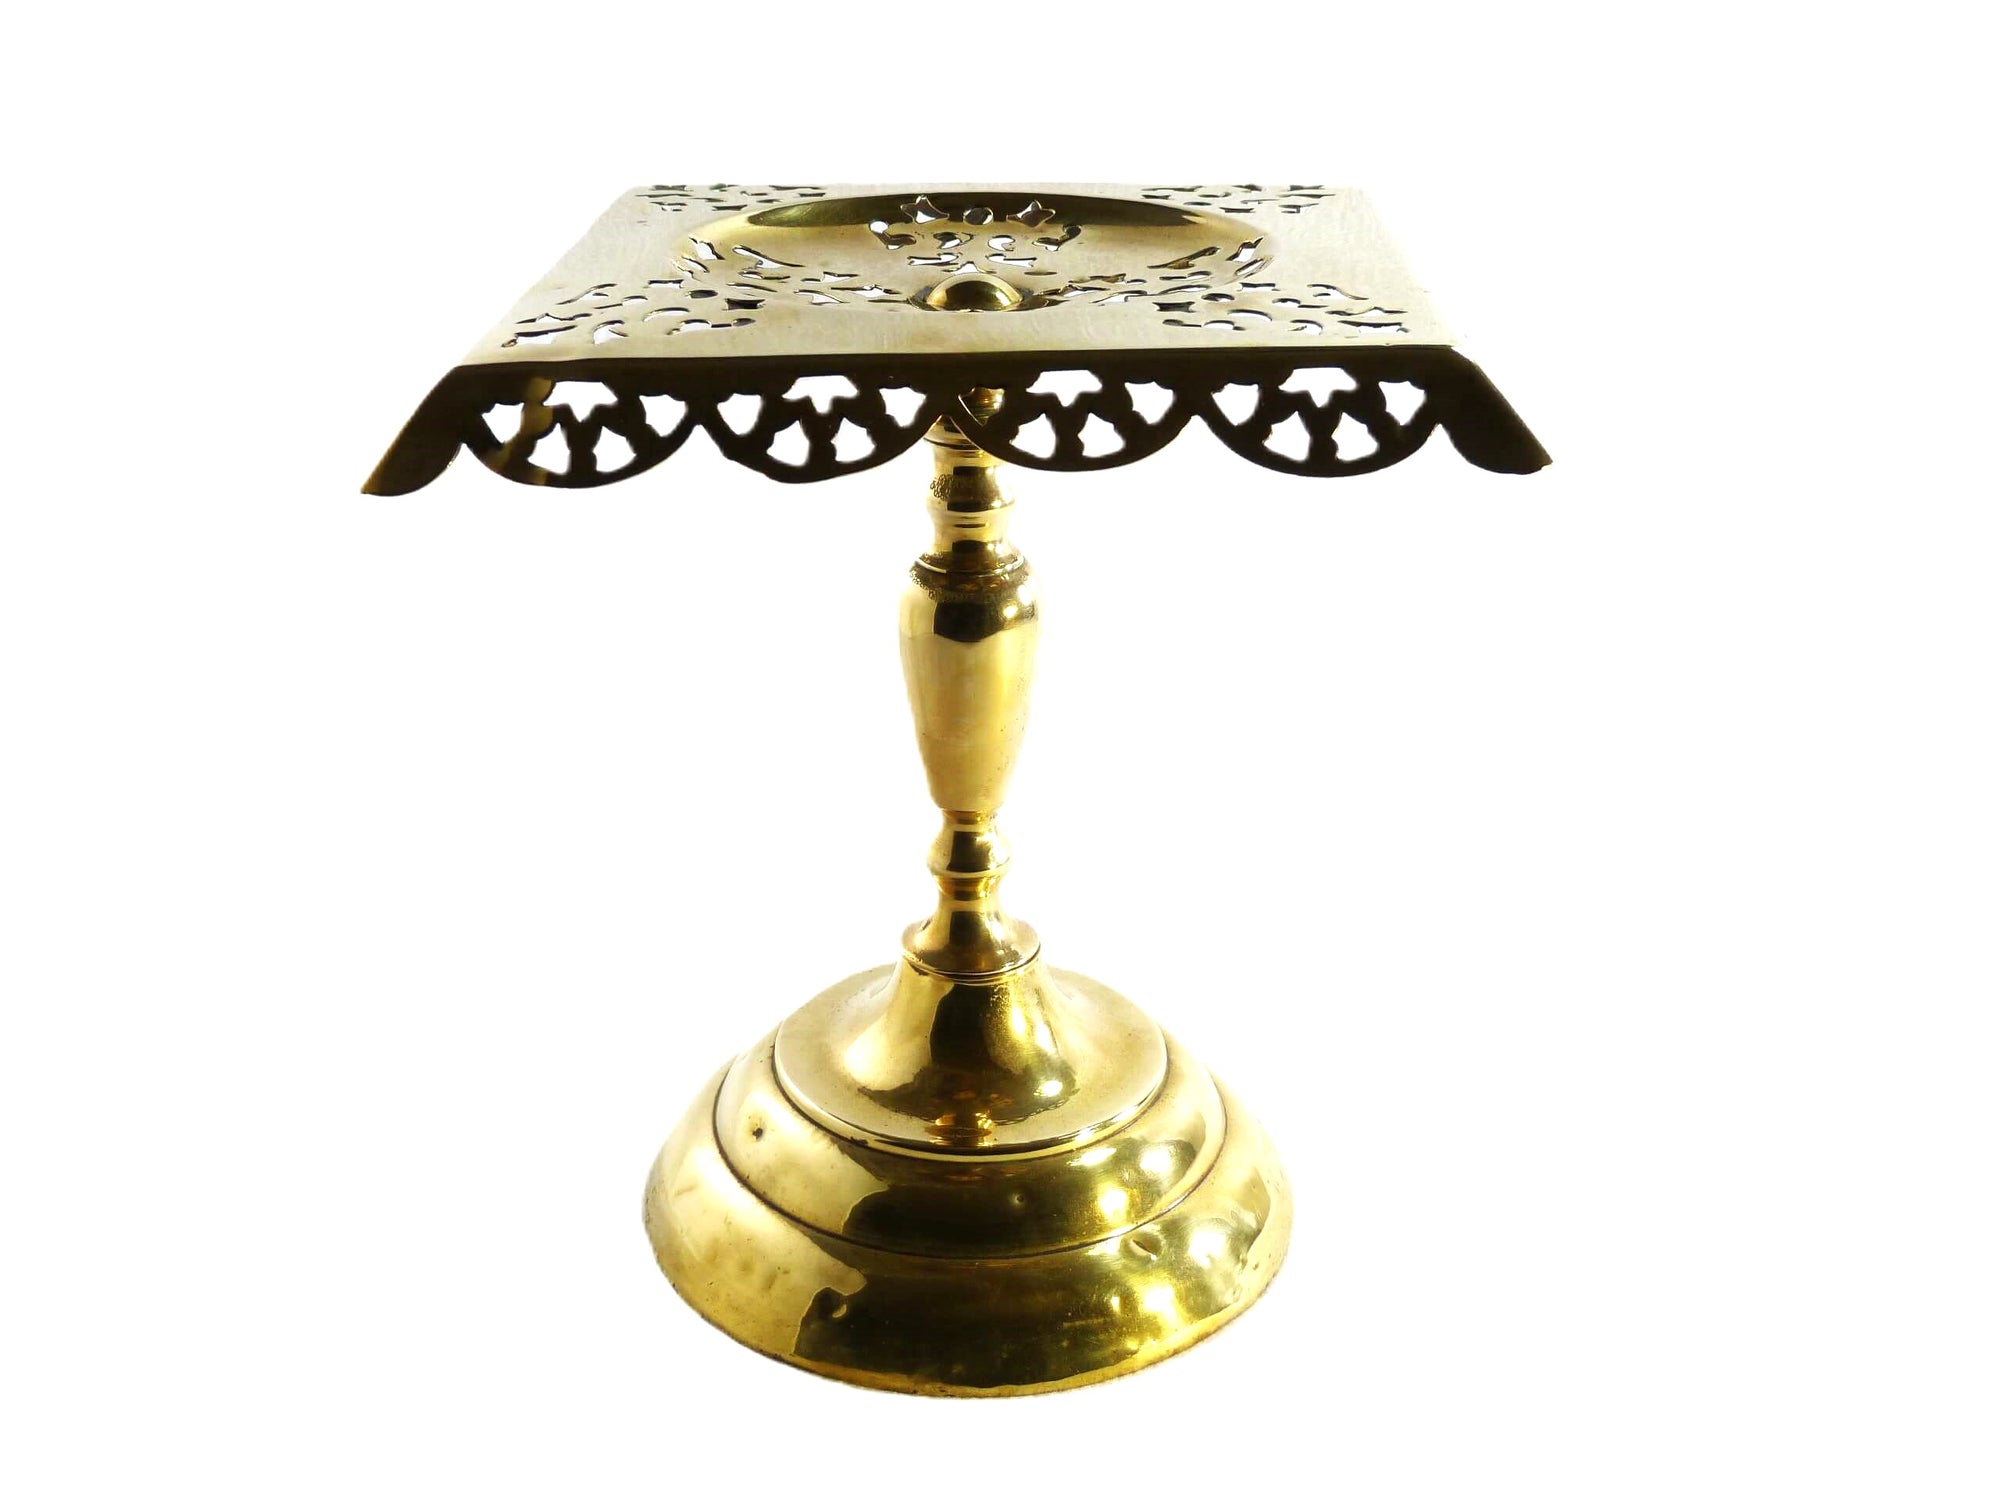 Victorian Brass Kettle Stand, Square English Hearth Trivet